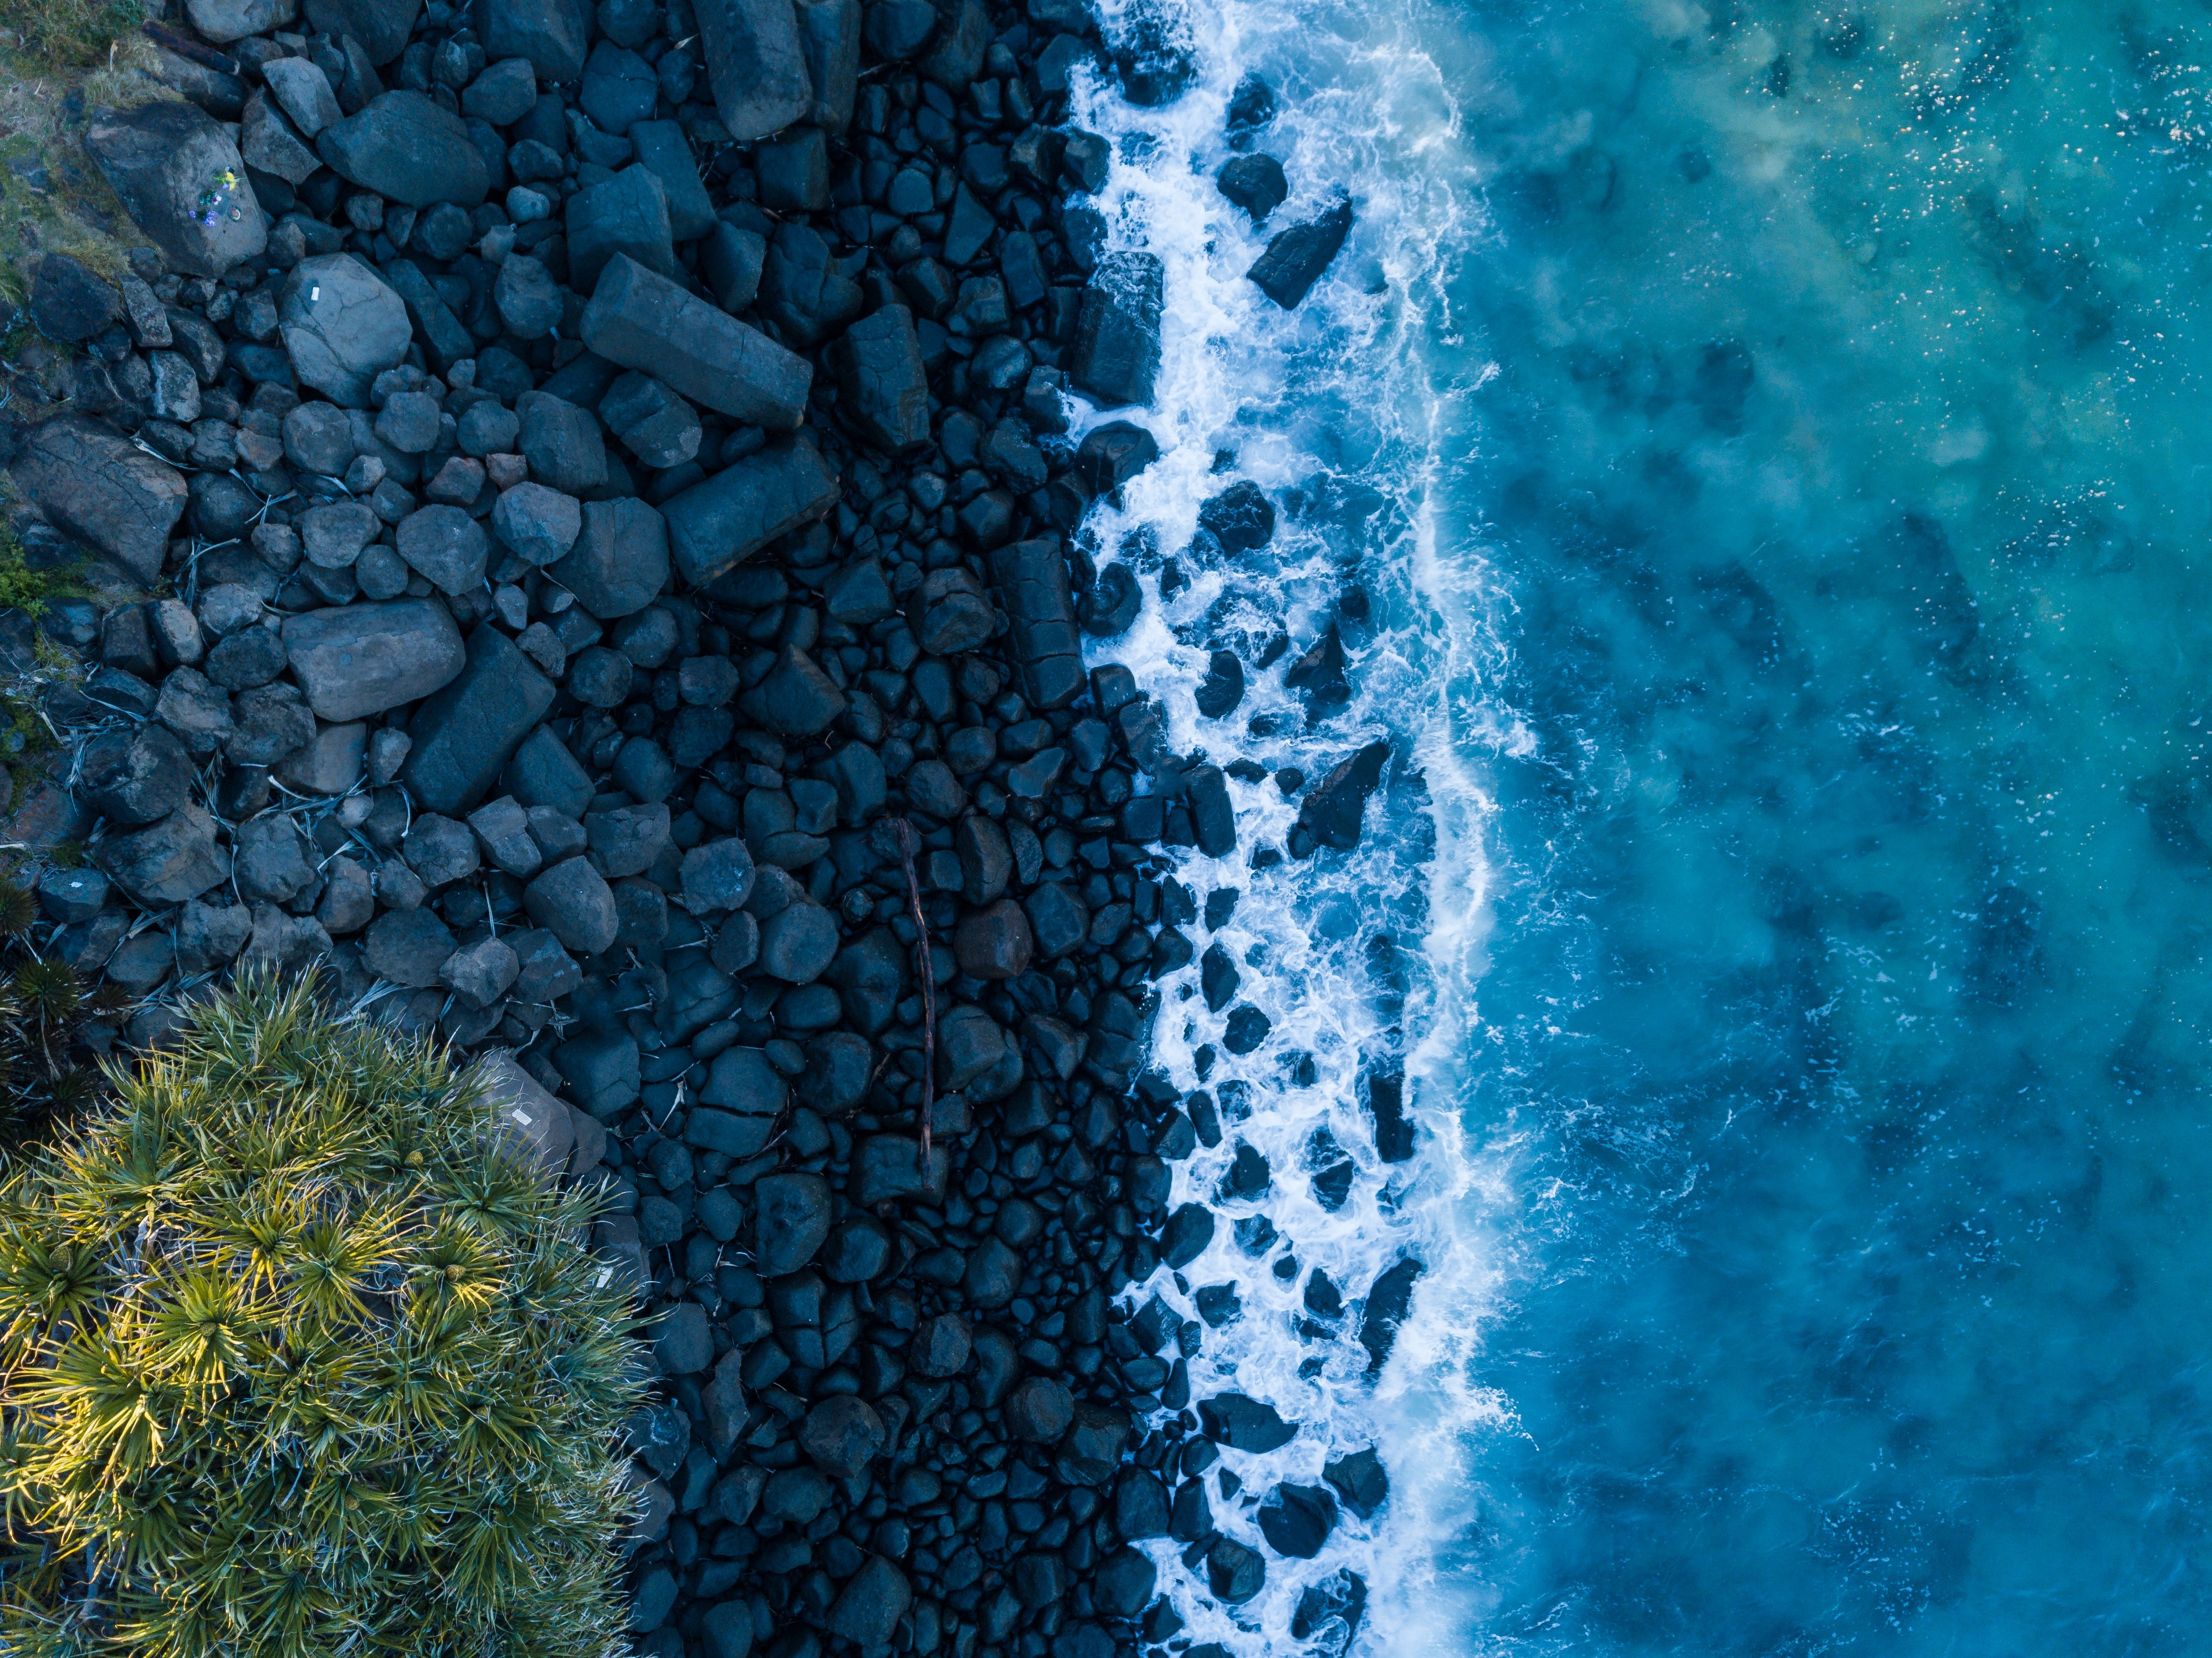 view from above, shore, ocean, bank, stones, surf, nature phone background